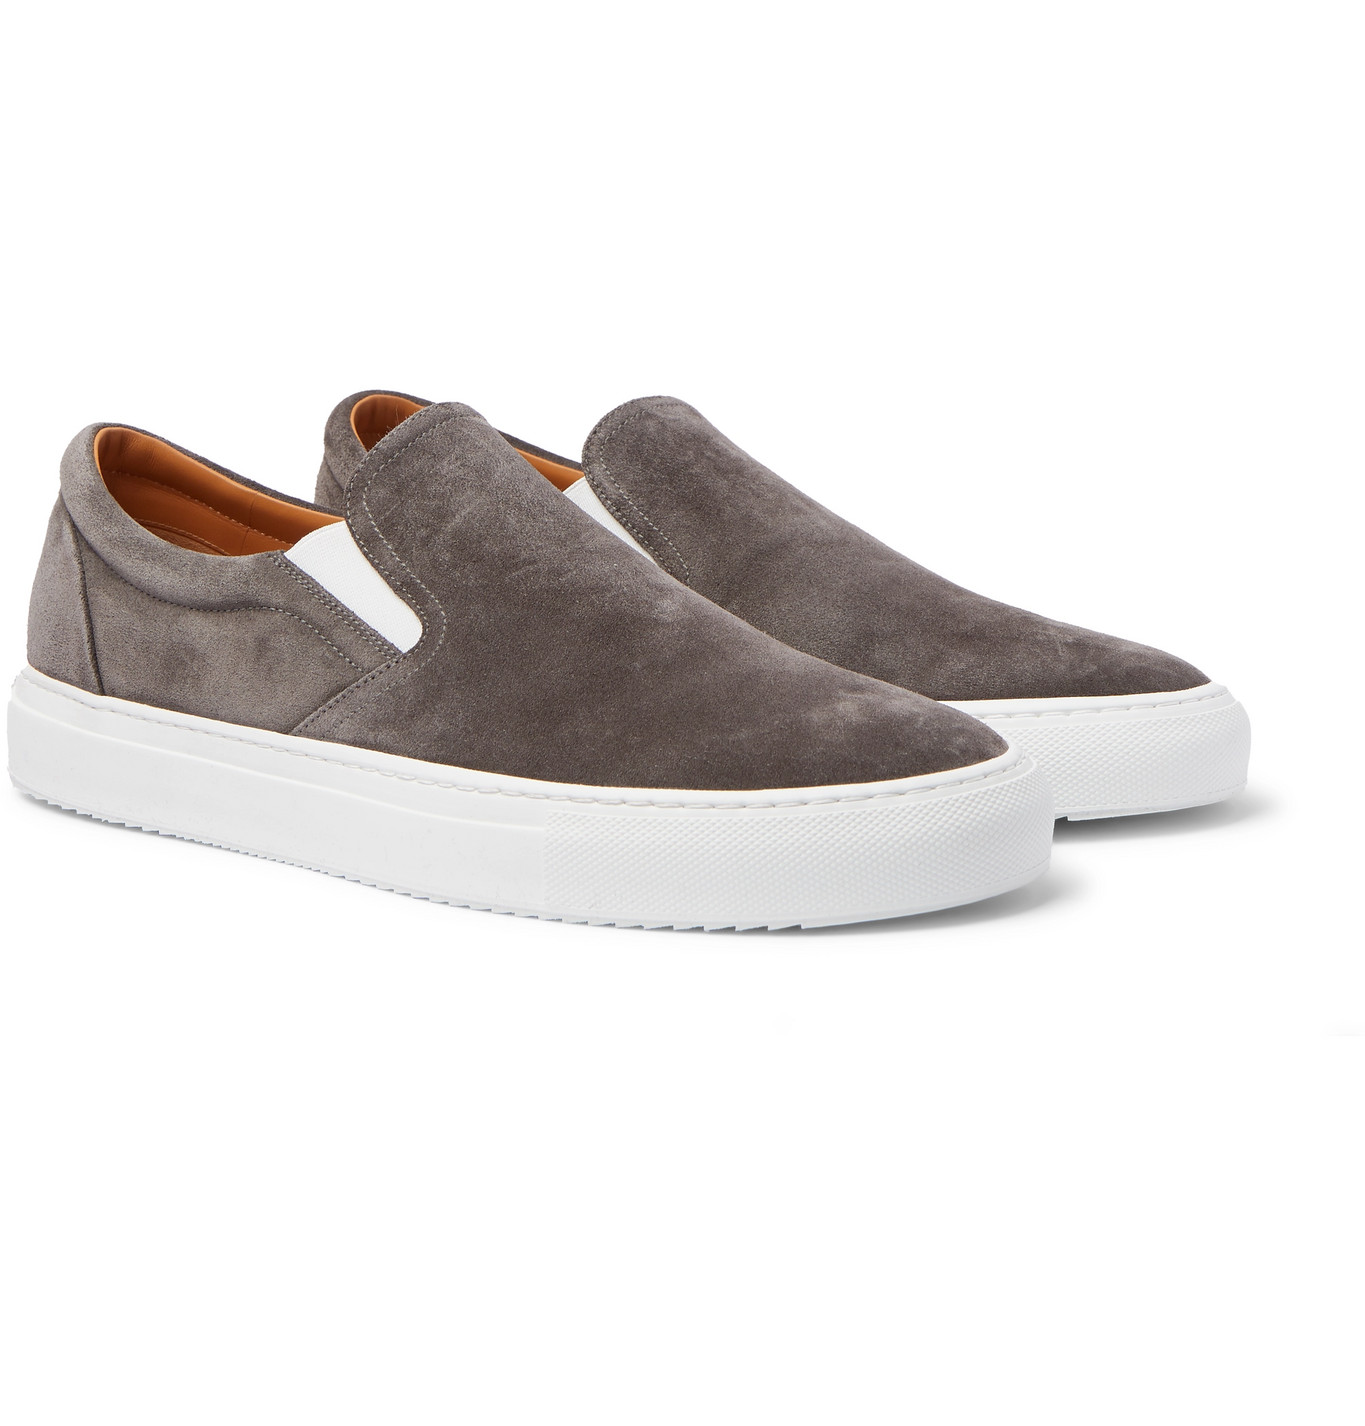 Mr P. - Larry Suede Slip-On Sneakers - Men - Gray | The Fashionisto